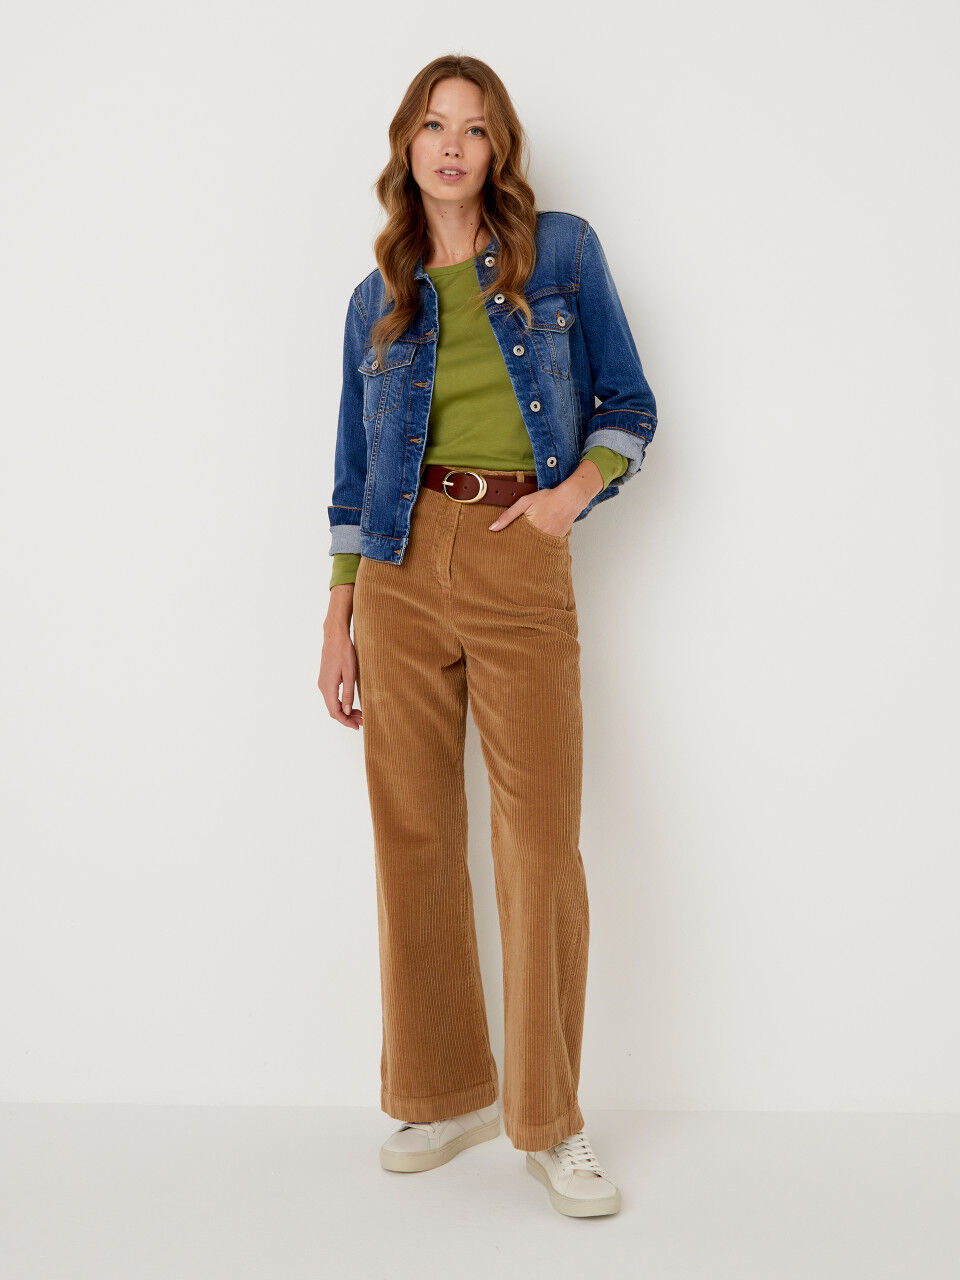 Buy Black Trousers  Pants for Women by UNITED COLORS OF BENETTON Online   Ajiocom